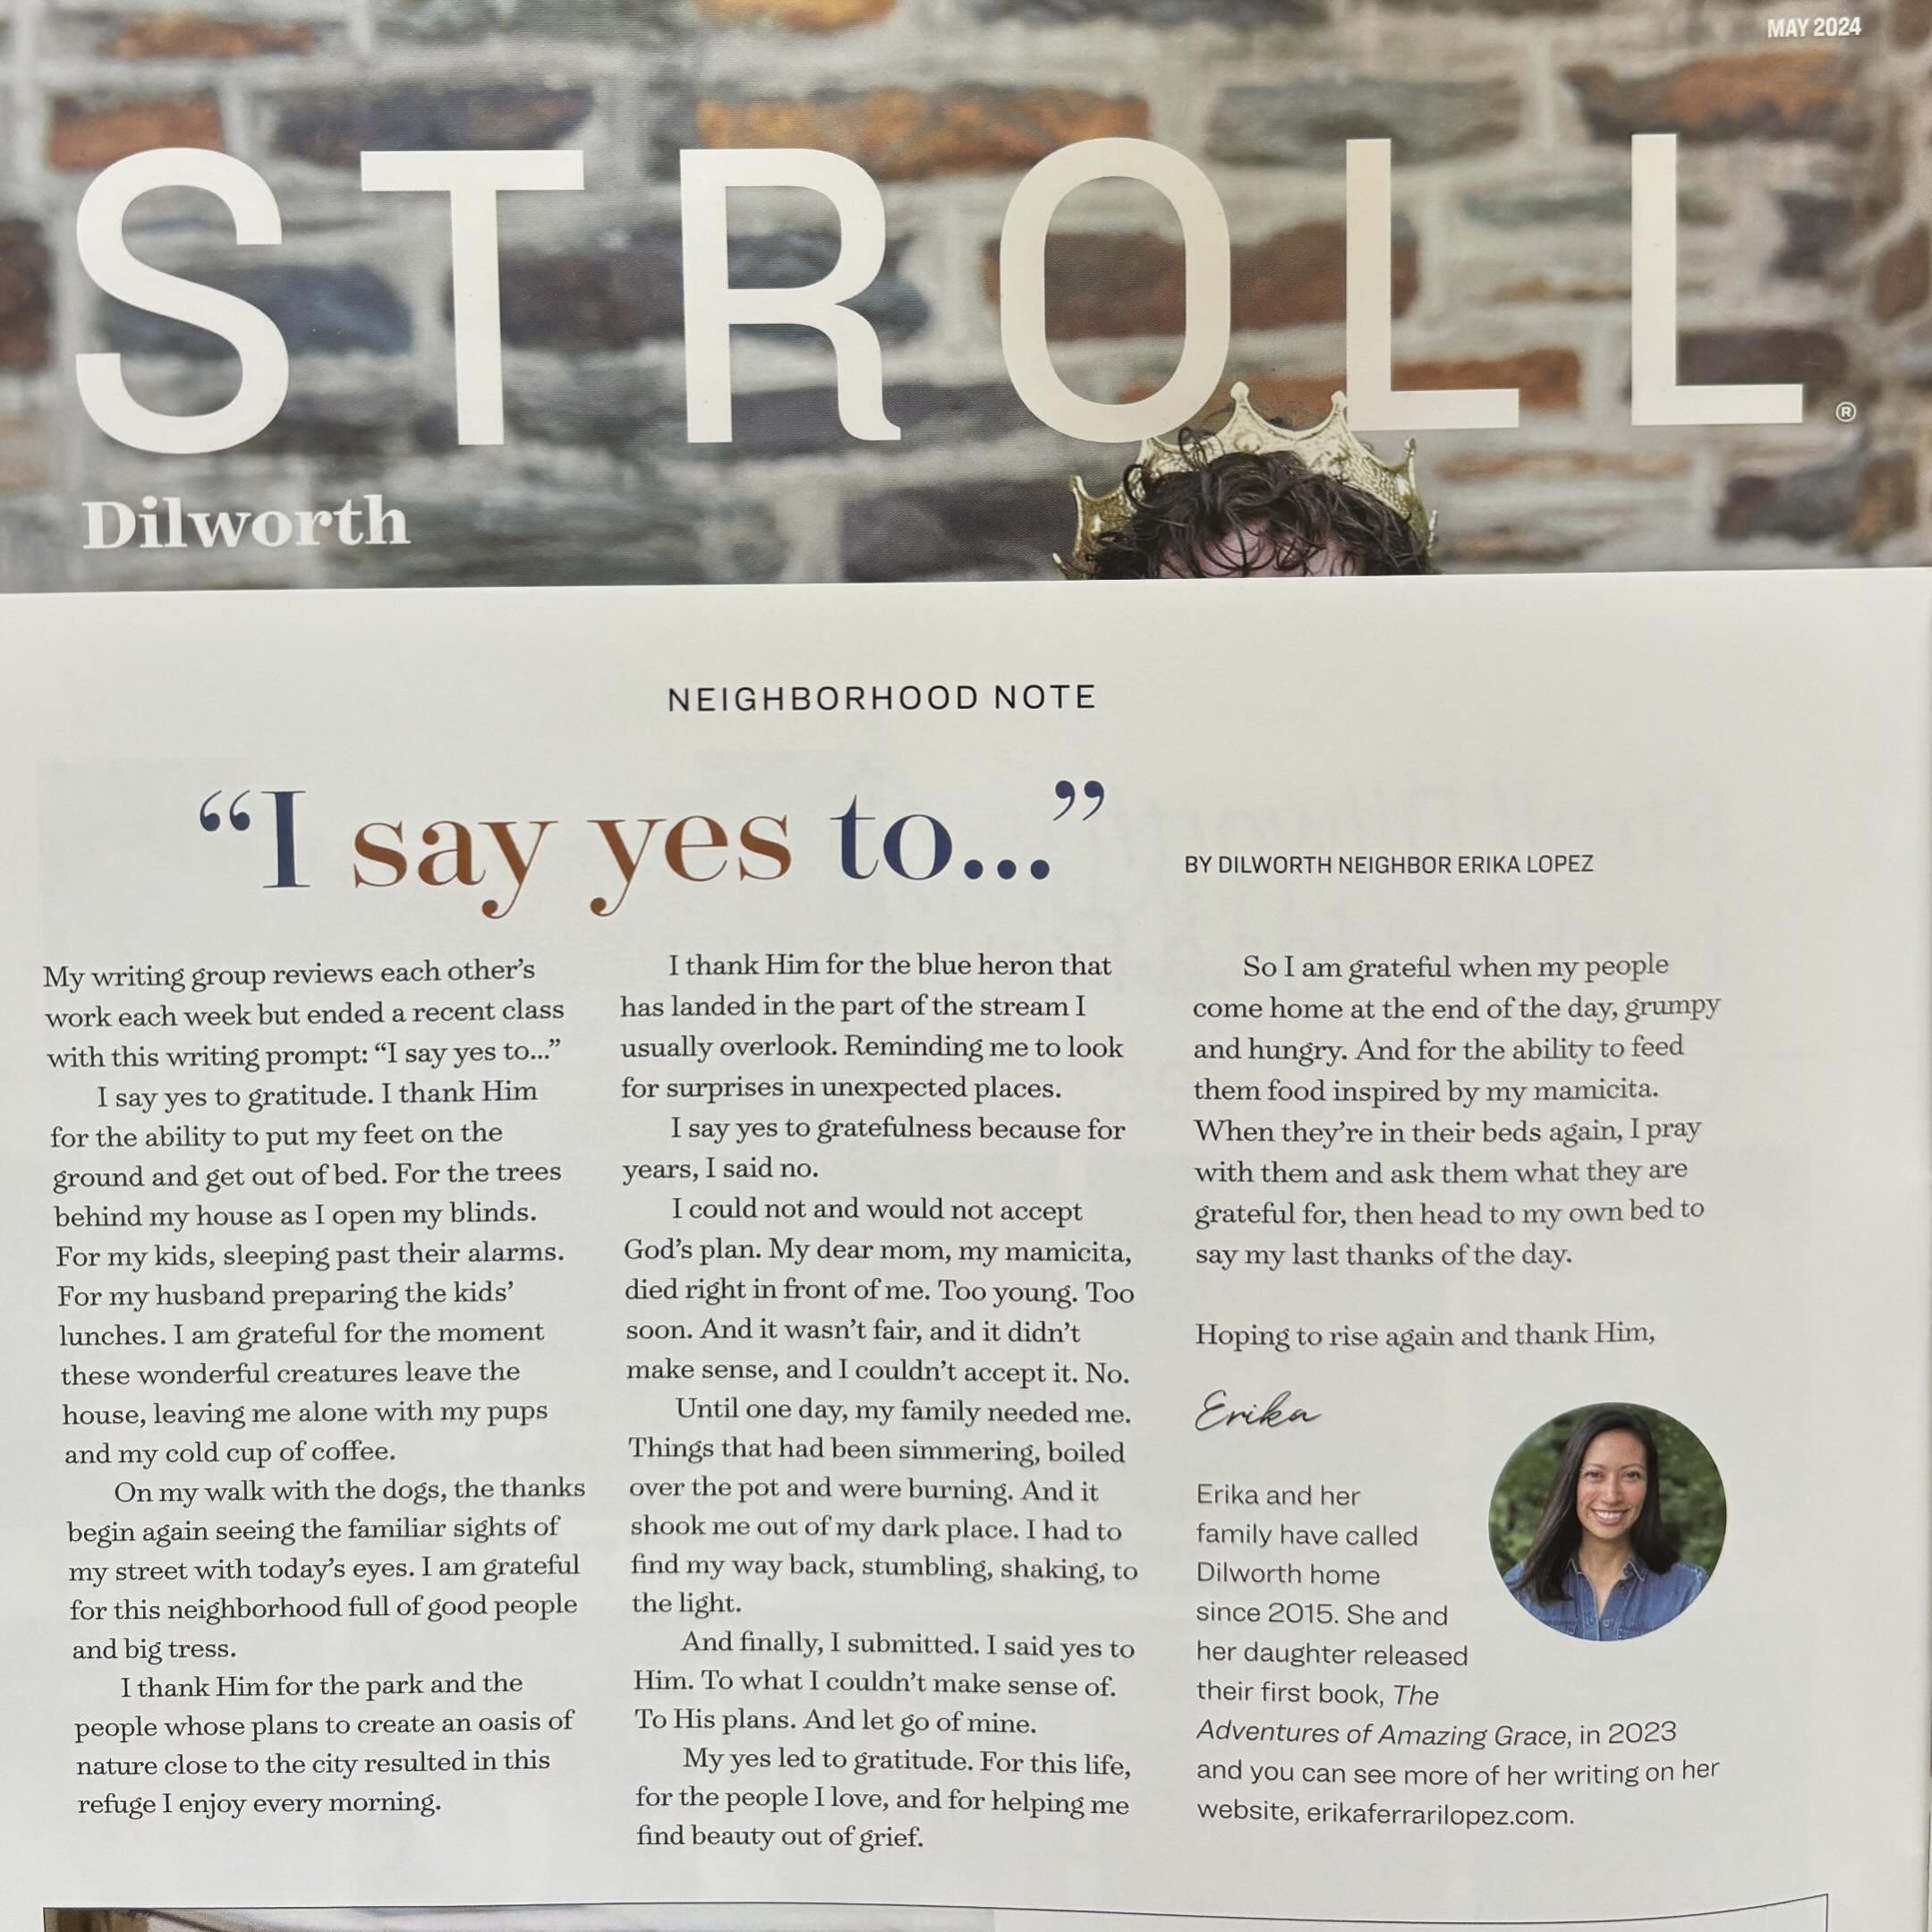 Thanks to @strolldilworth for reaching out to feature my &ldquo;I say yes to&hellip;&rdquo; piece in the May issue. You&rsquo;ll see it&rsquo;s very condensed compared to my full essay (you can read it on Landings, link in bio). I never think I can f